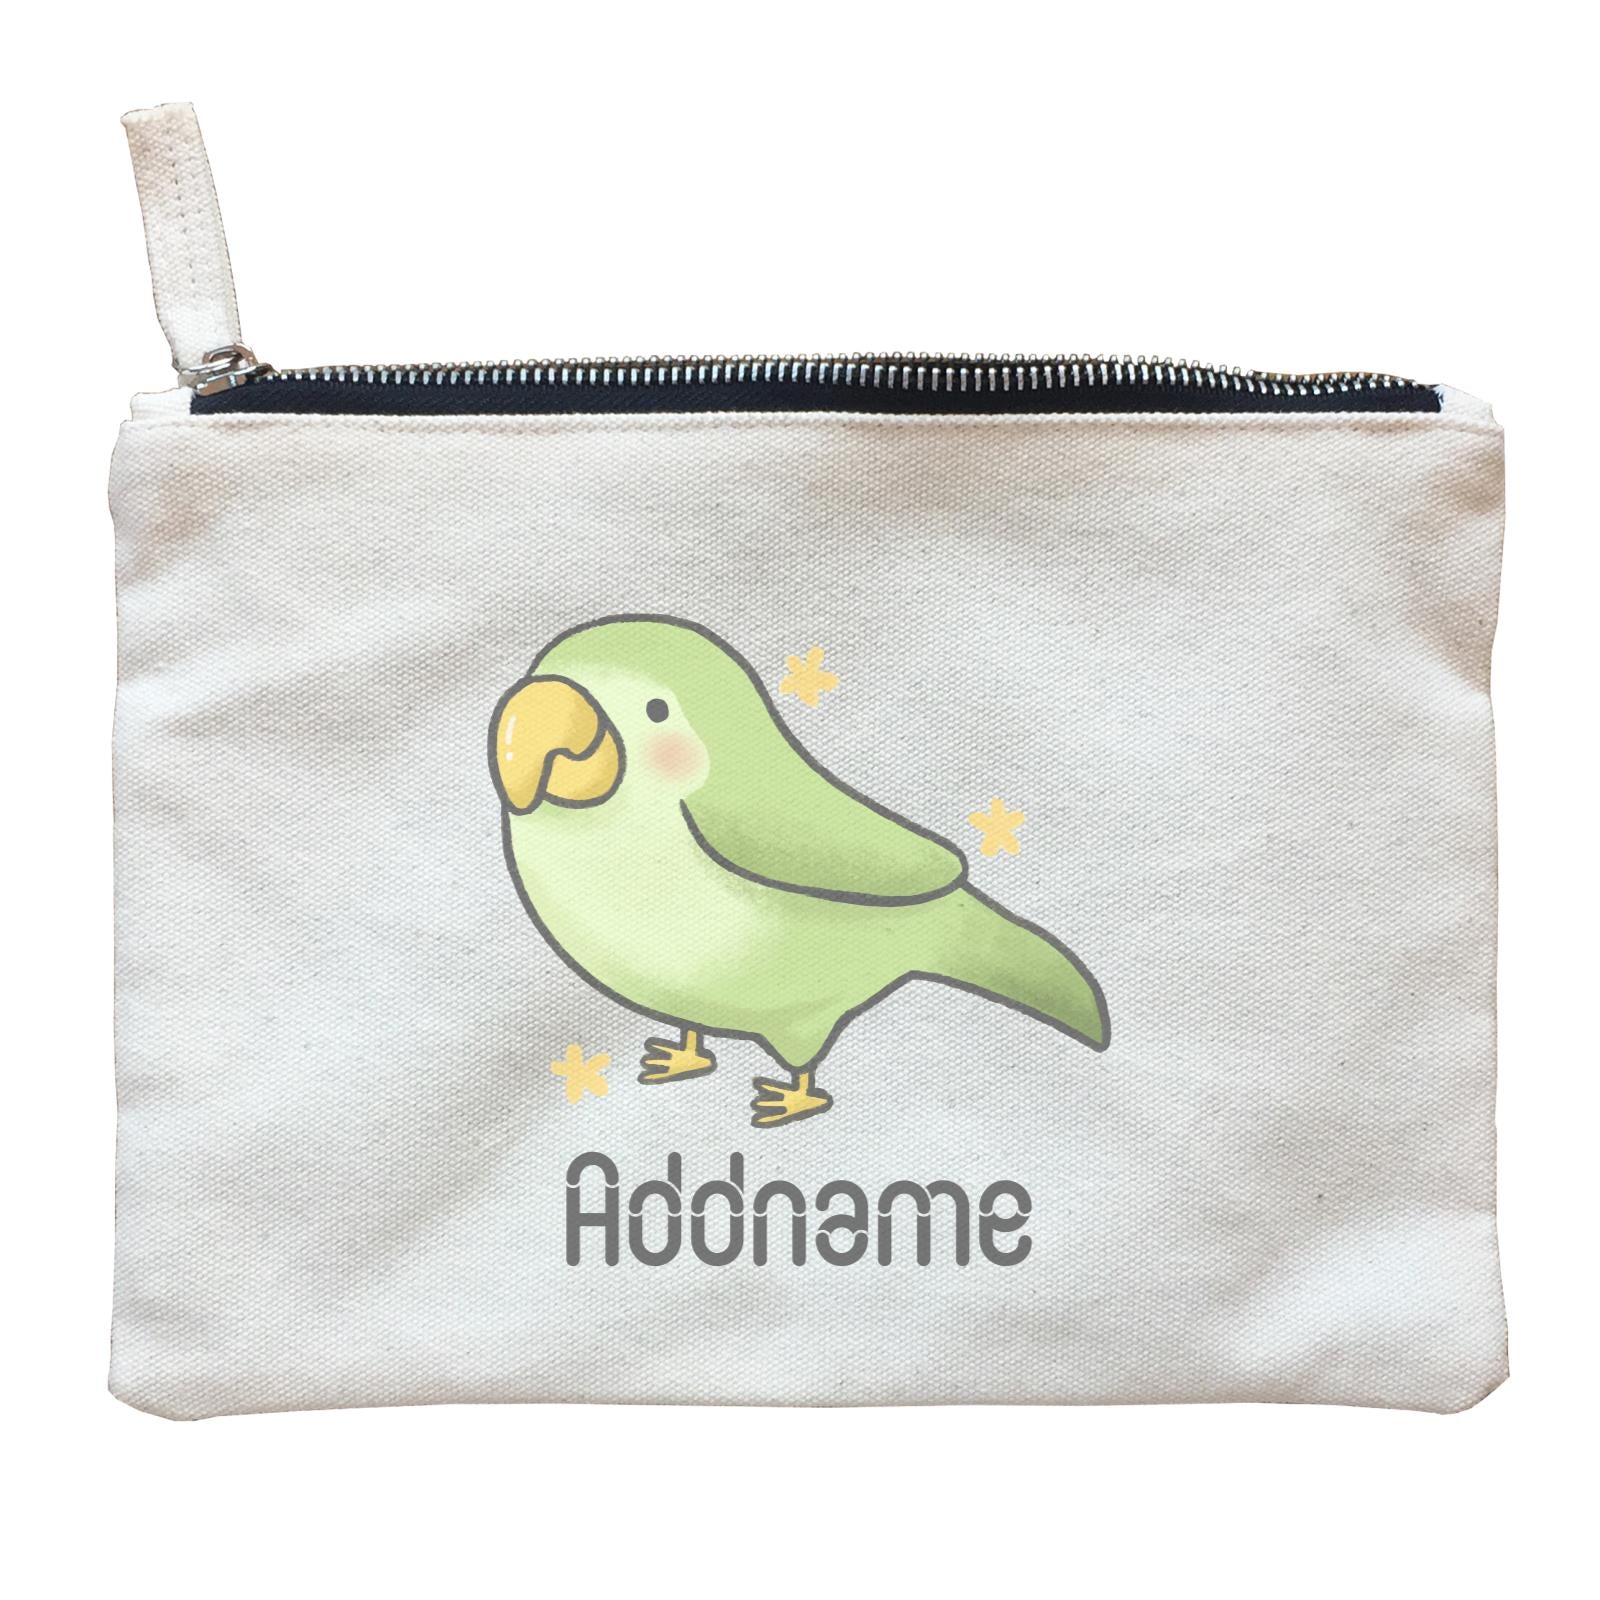 Cute Hand Drawn Style Parrot Addname Zipper Pouch